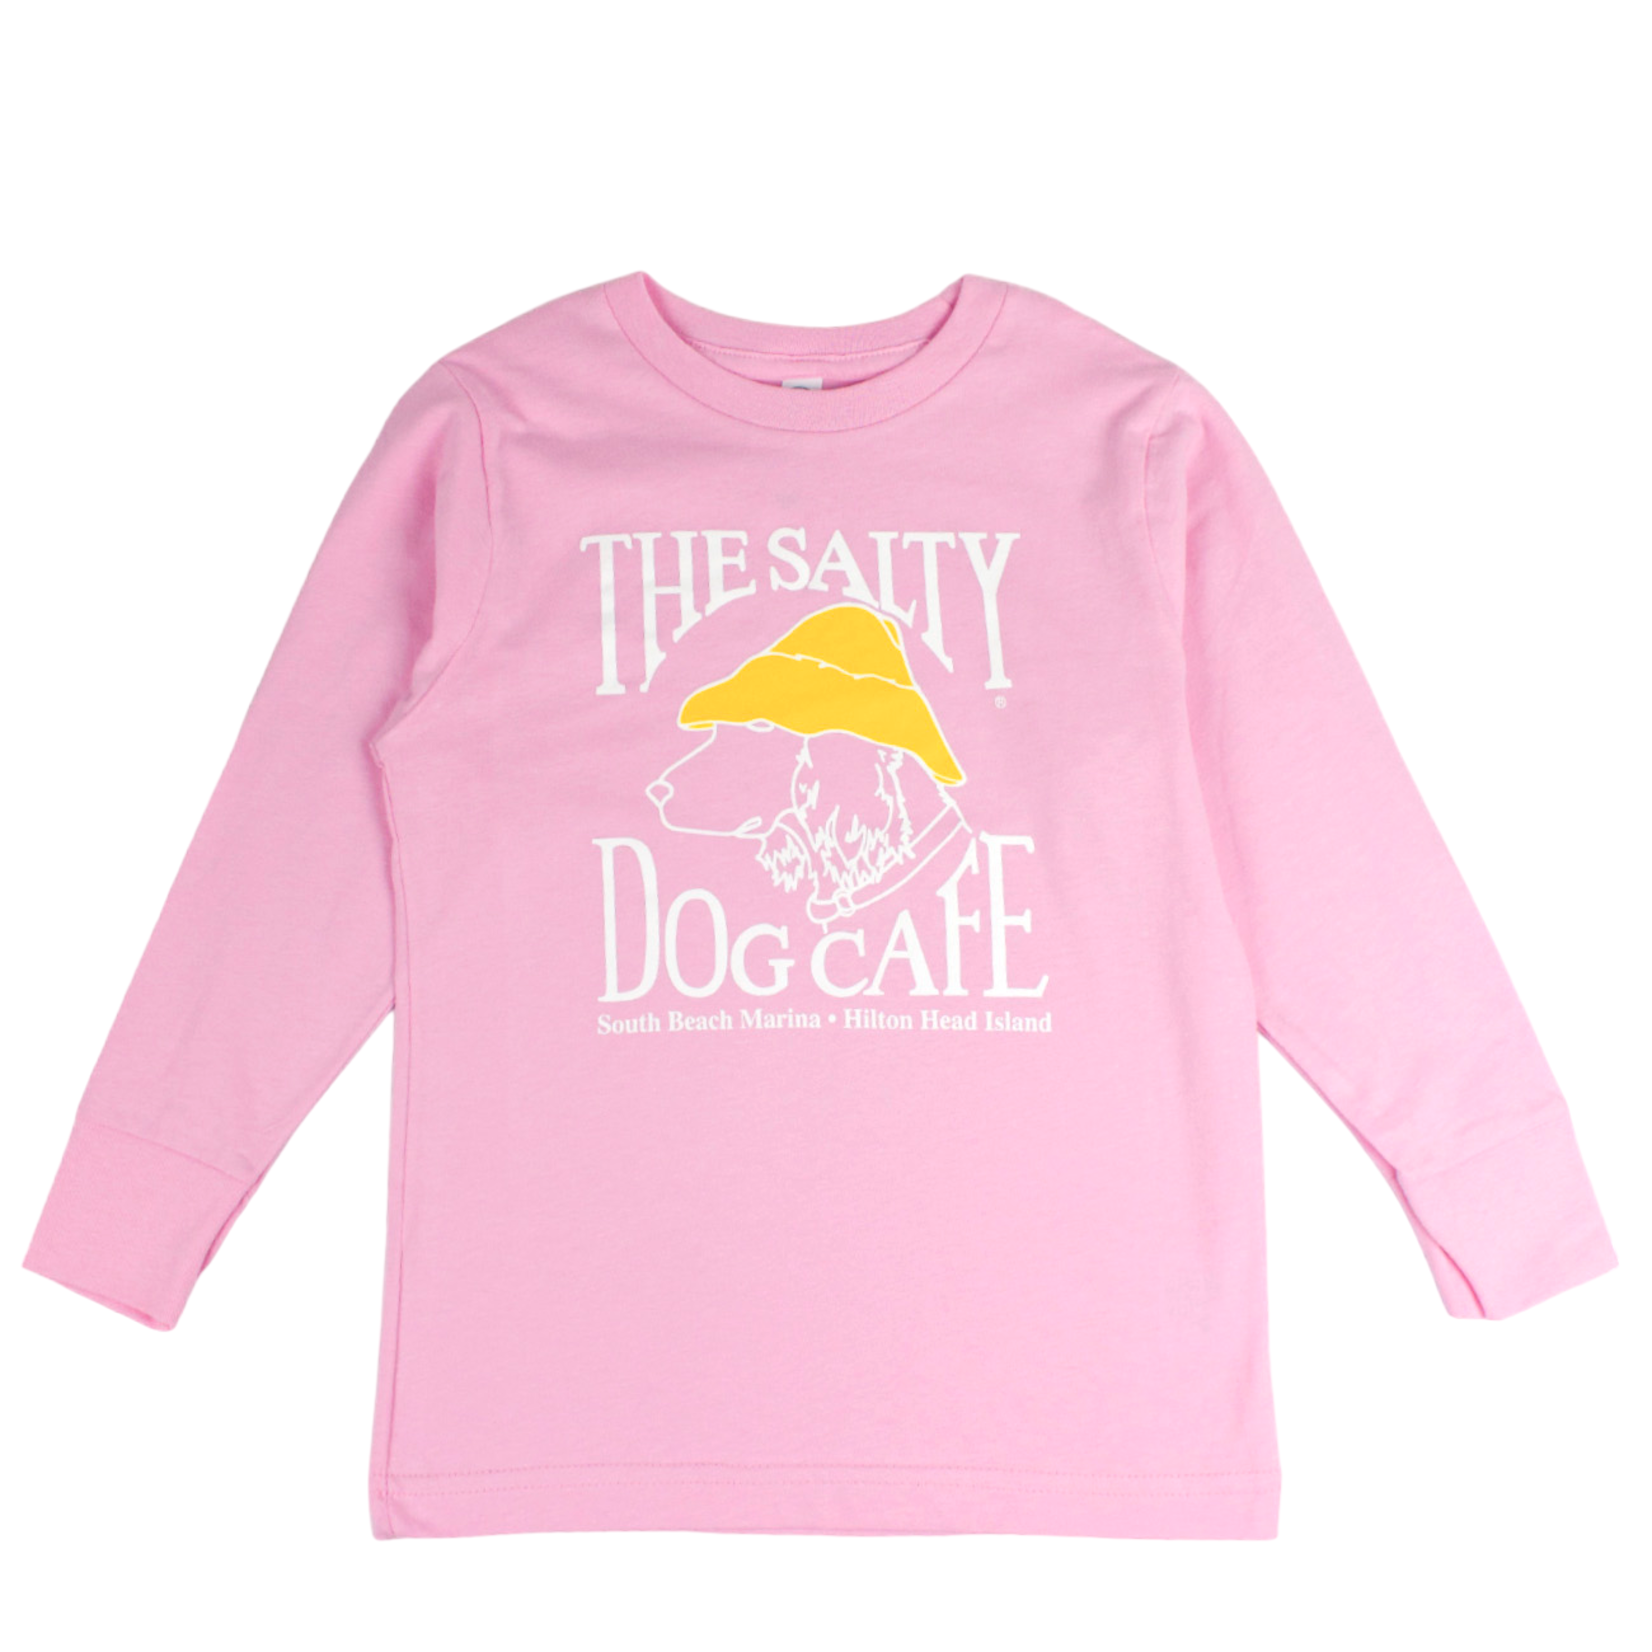 Youth L/S Pale Pink